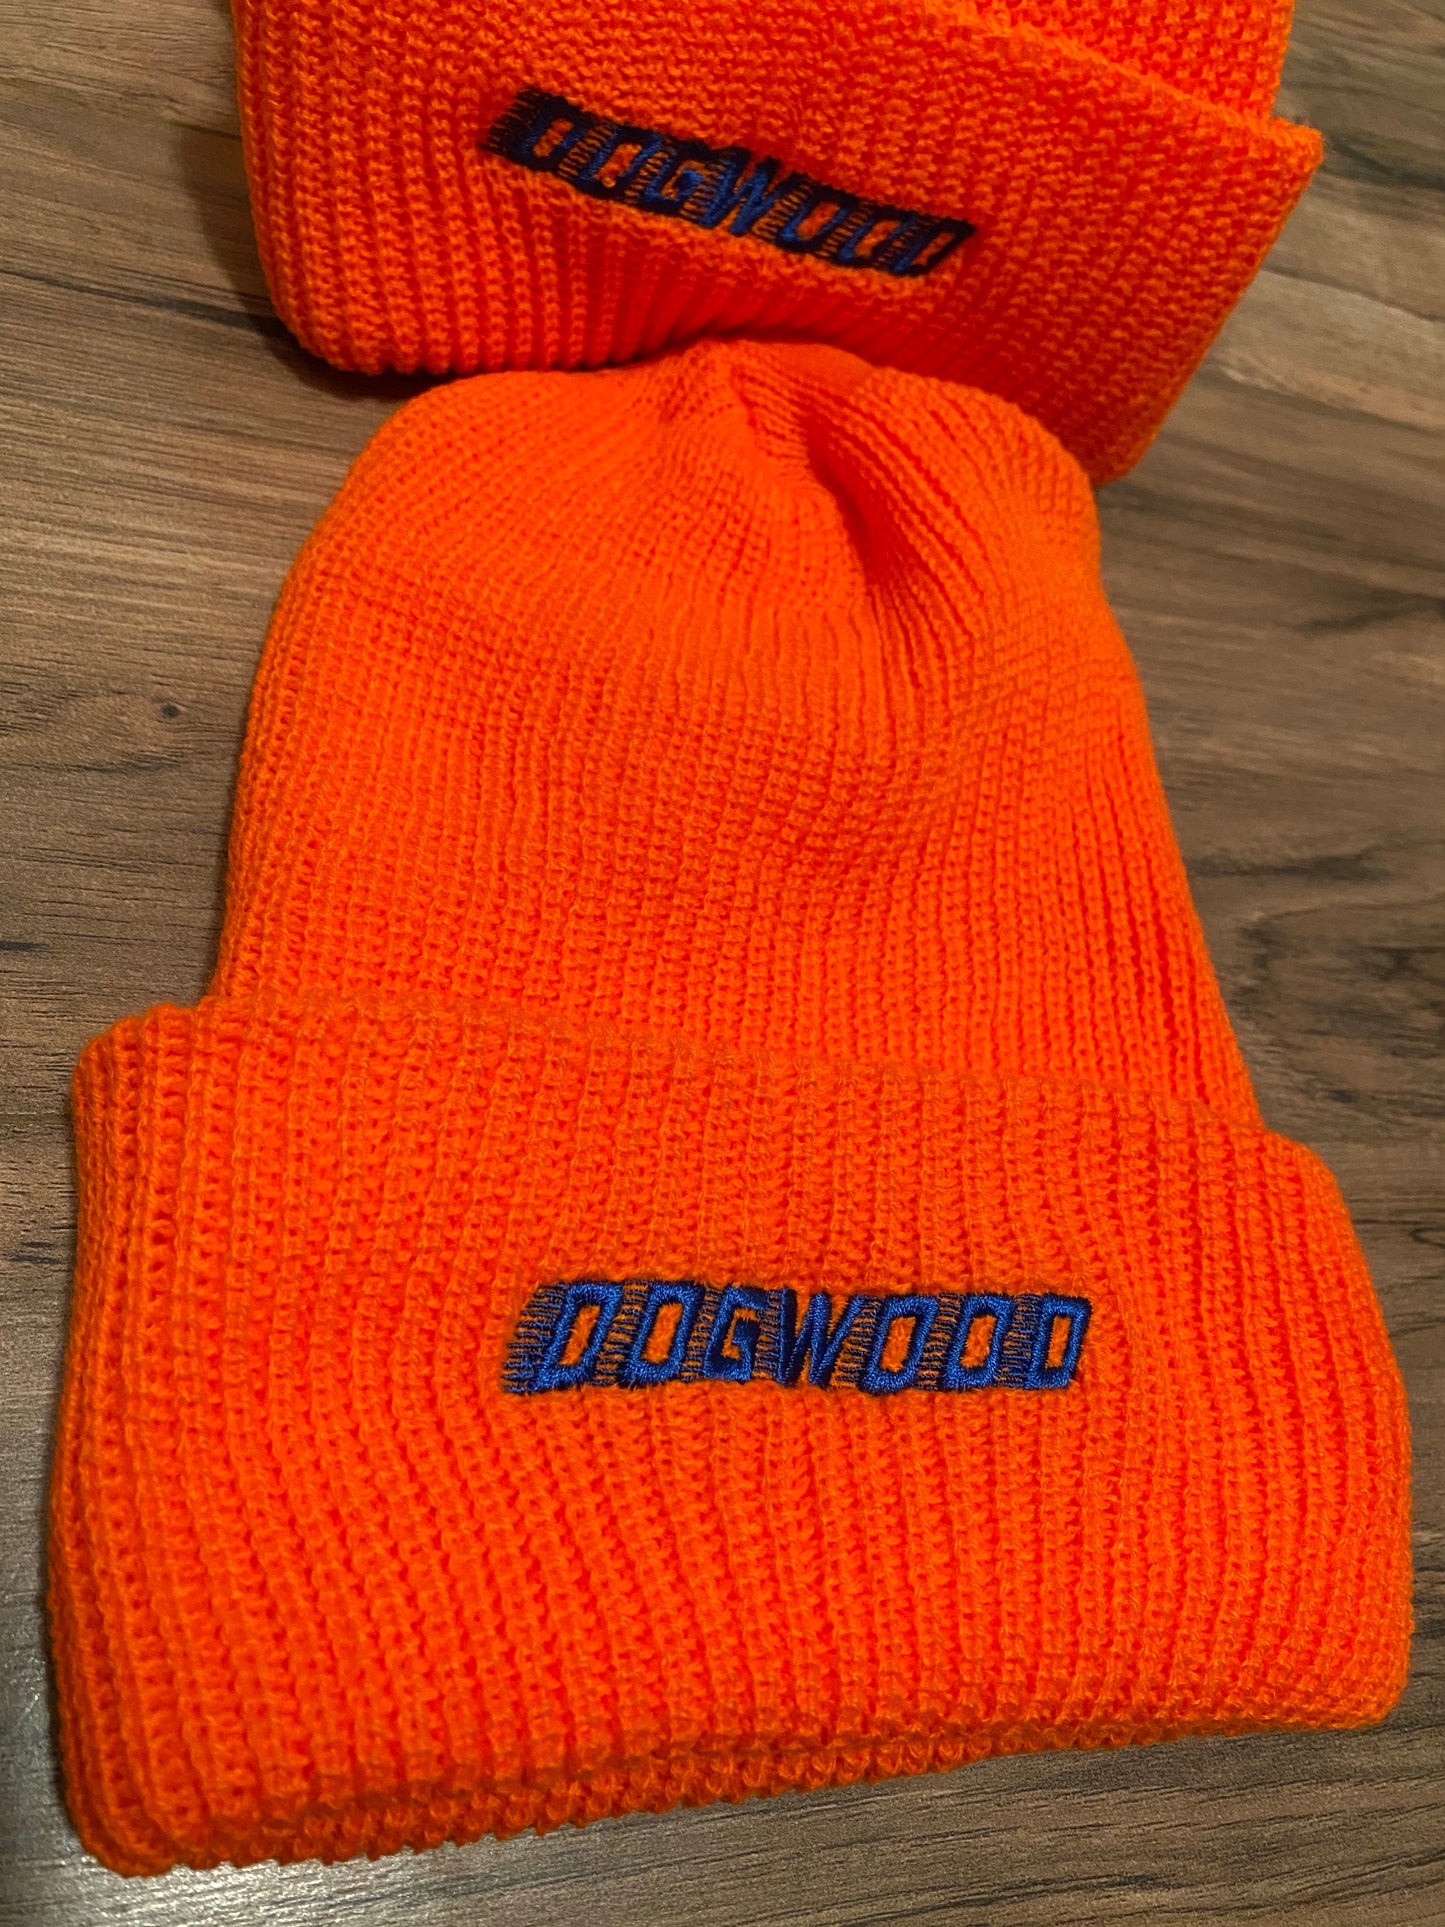 Speedwave Acrylic Knit Beanie OS (color options listed)